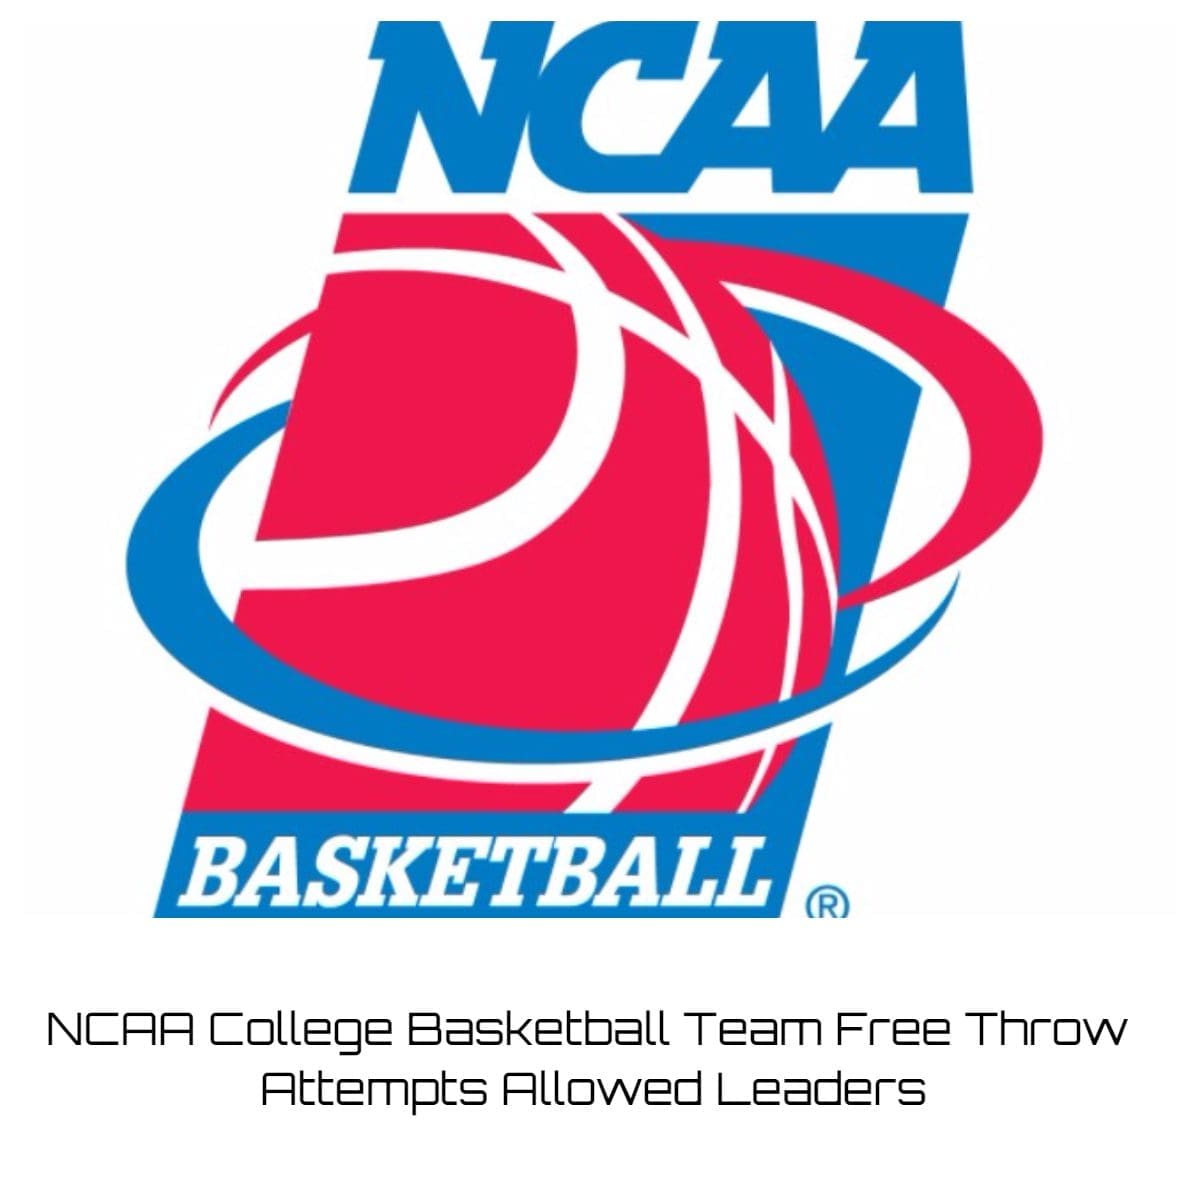 NCAA College Basketball Team Free Throw Attempts Allowed Leaders